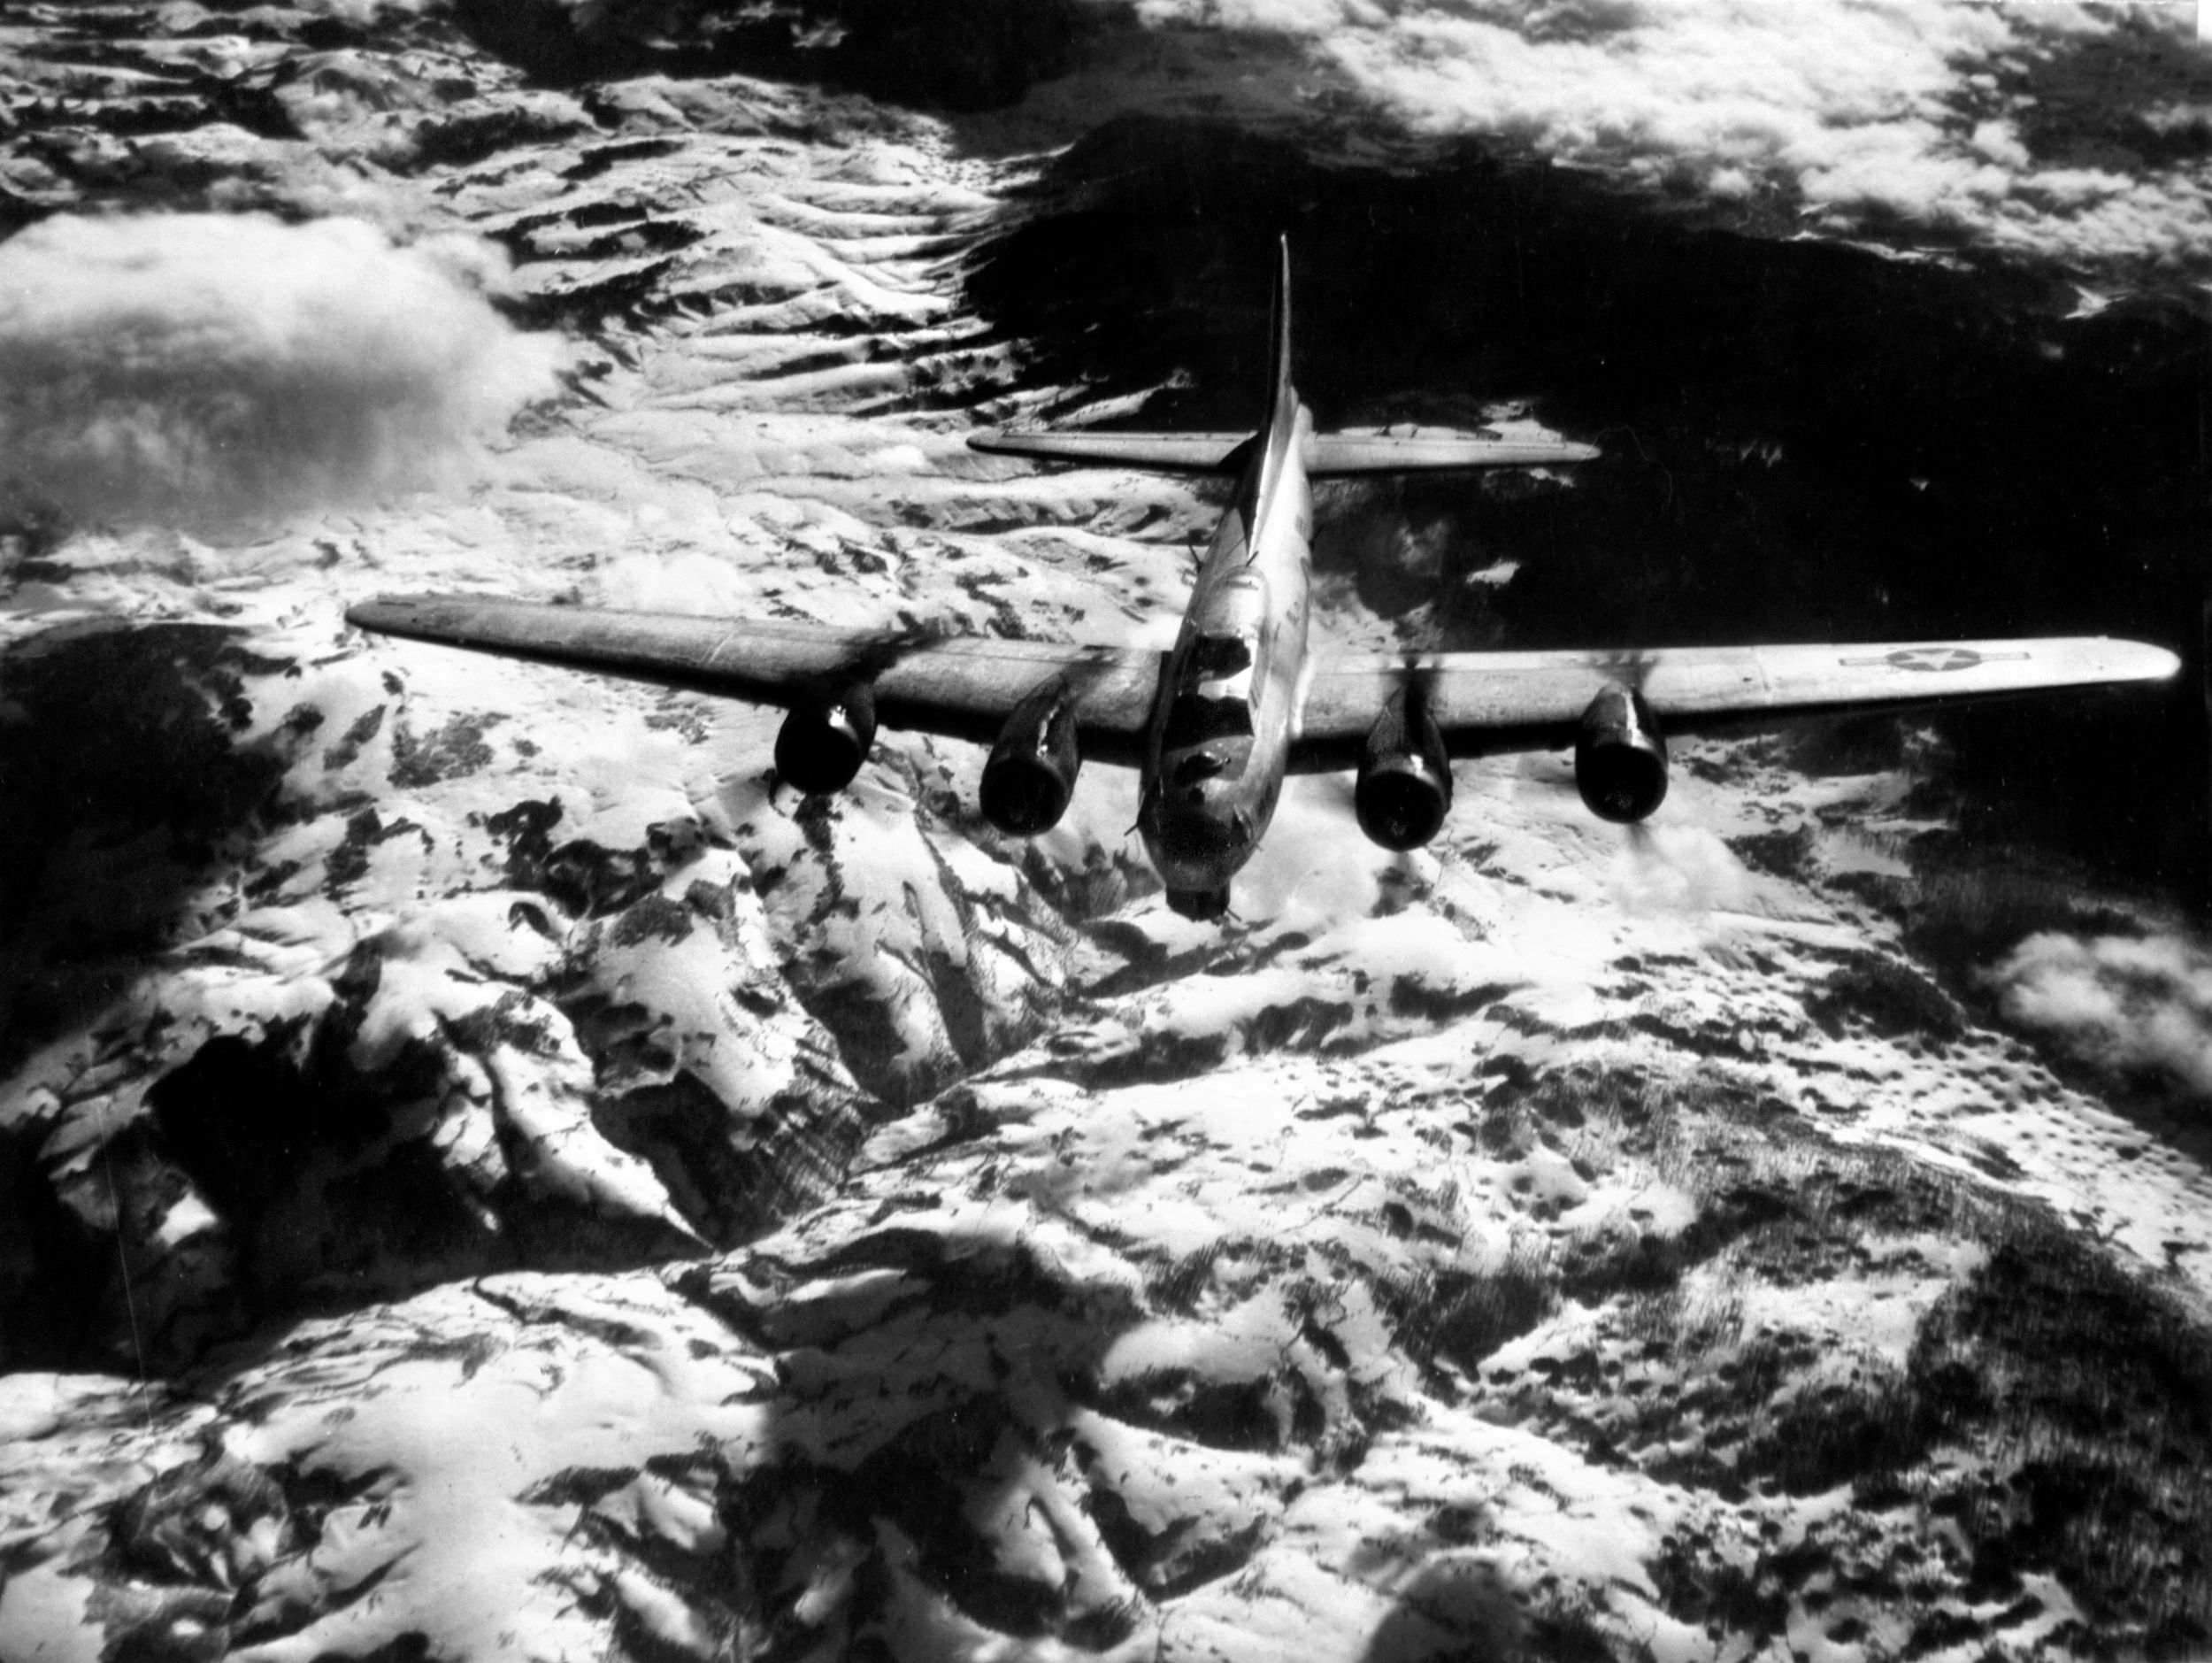 On another mission to Yugoslavia, a B-17 flies high over snow-capped mountains. Tucker said the only thing that kept crewmembers alive in the cold at high altitudes were oxygen and heated flight suits.